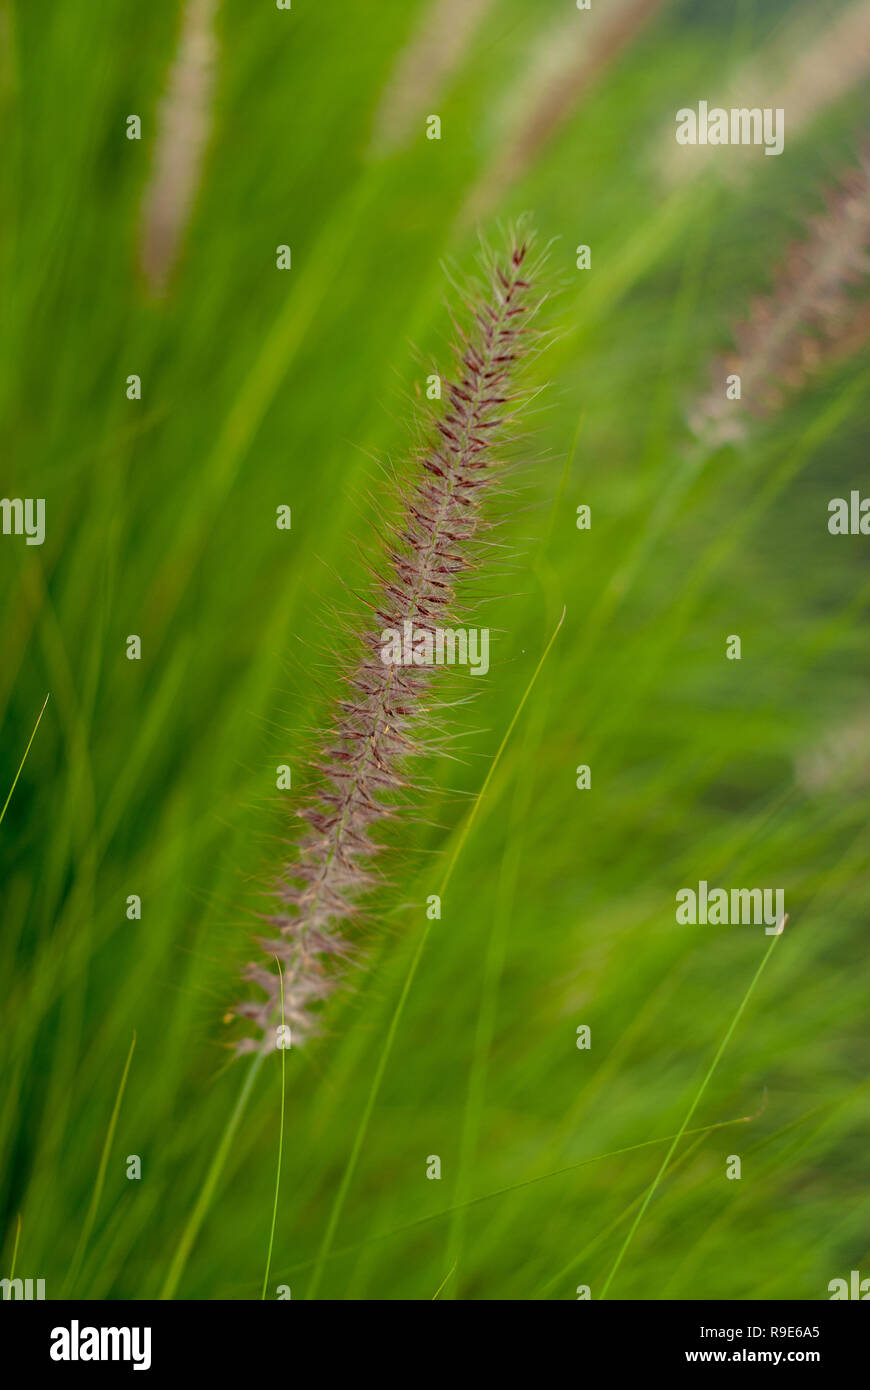 Beautiful tall weeds in the garden with soft focus in background Stock Photo